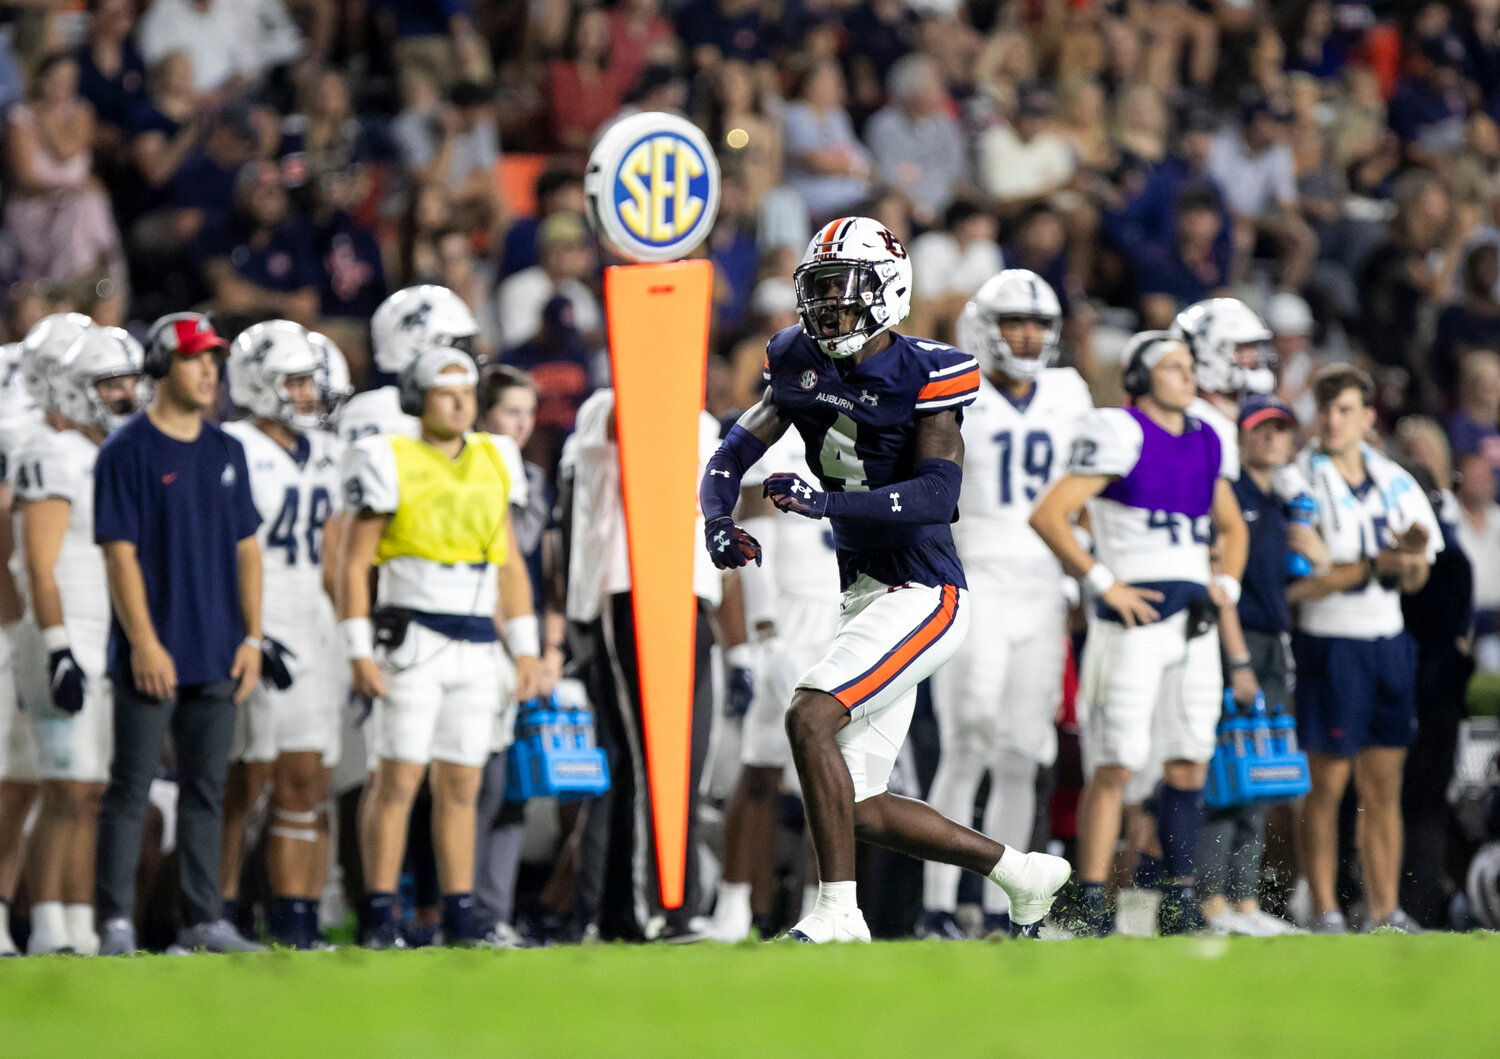 Spanish Fort alum DJ James celebrates a tackle for loss during the Auburn Tigers’ homecoming game against the Samford Bulldogs on Pat Dye Field at Jordan-Hare Stadium on Saturday, Sept. 16. He was joined in representing Baldwin County by Samford’s Midnight Steward and Forrest Taylor.